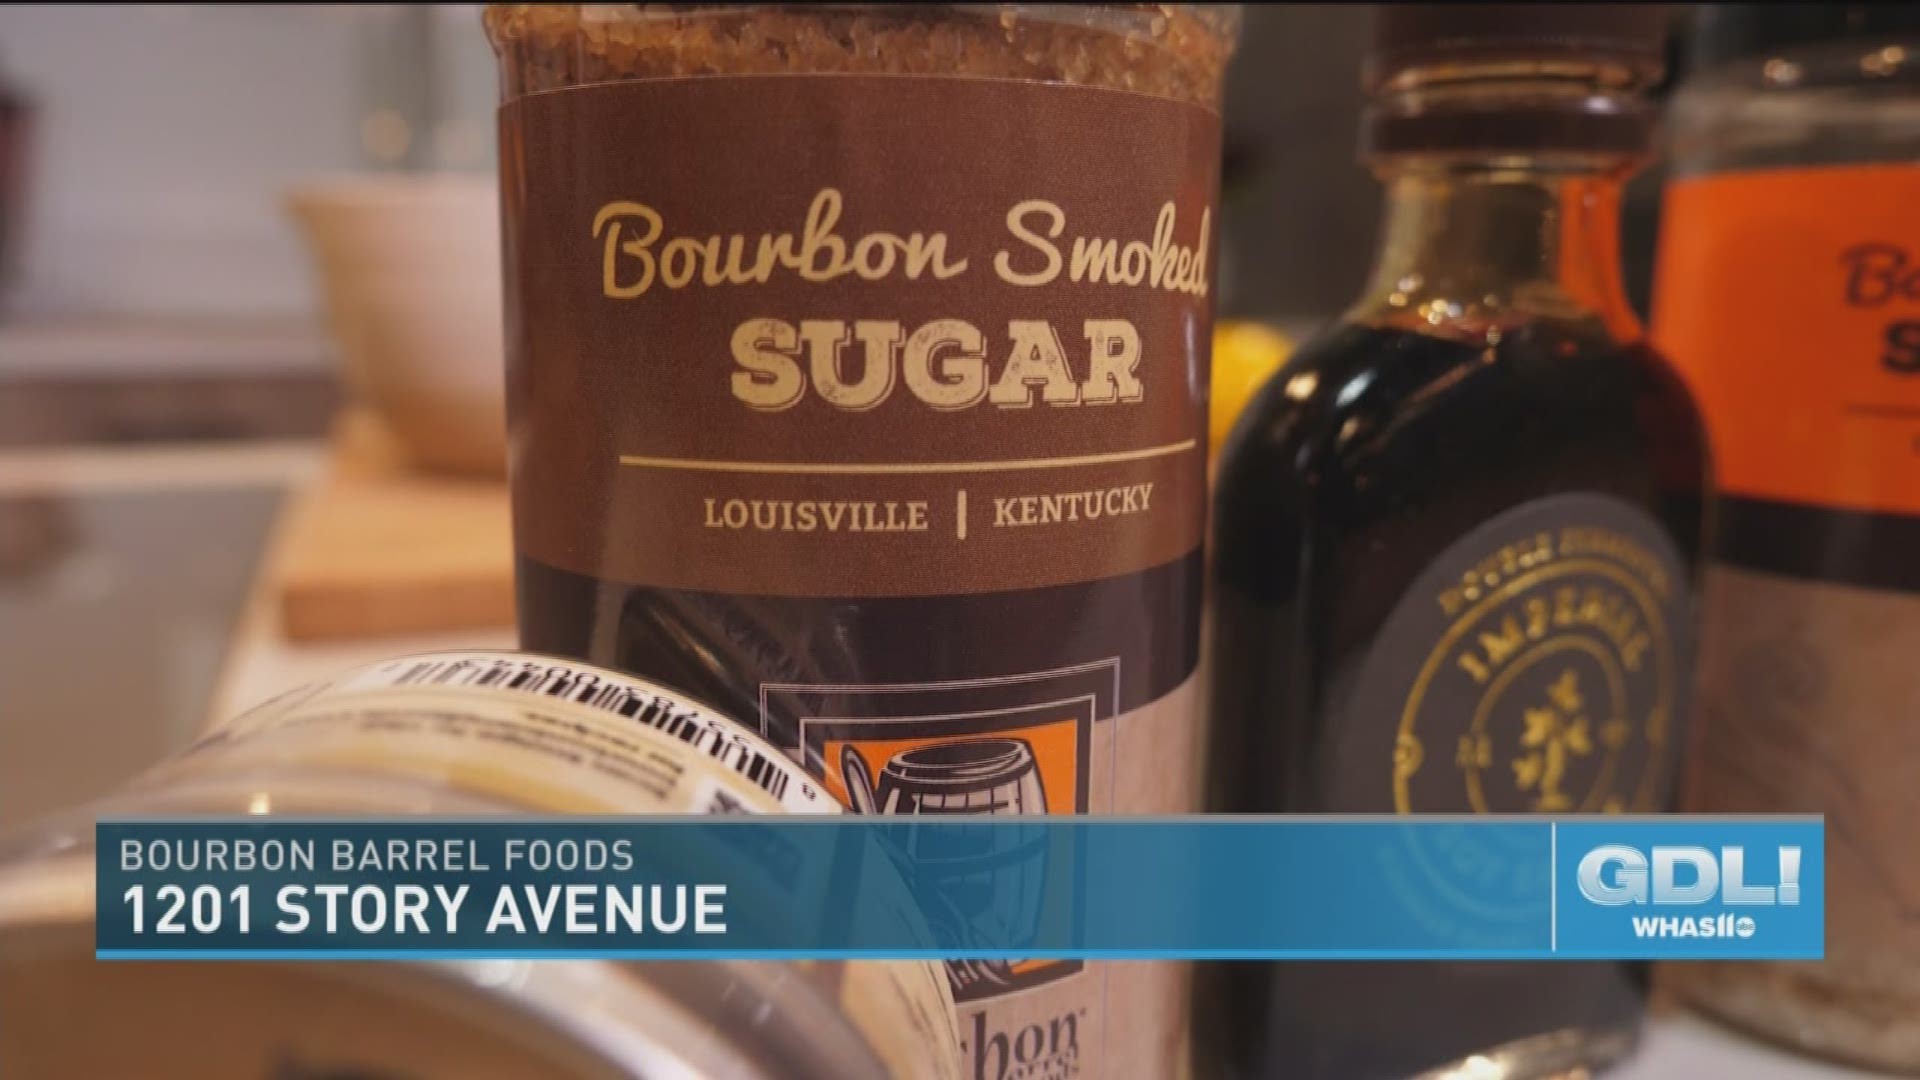 Bourbon Barrel Foods is located at 1201 Story Avenue in Louisville, KY. For recipes, go to BourbonBarrelFoods.com.